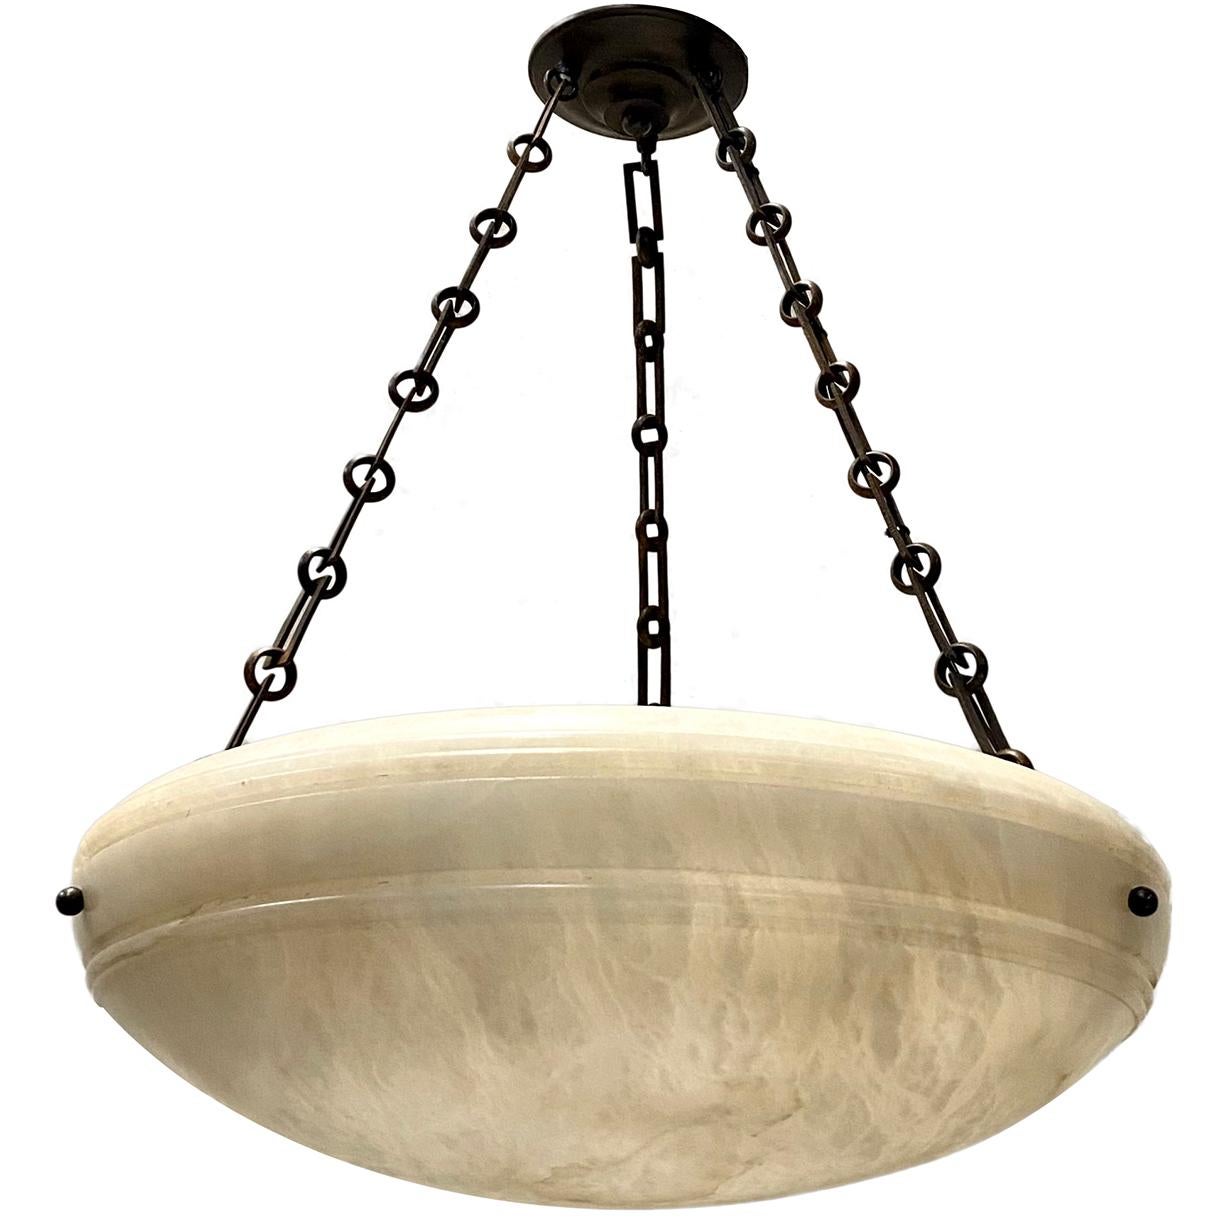 A circa 1950's French carved alabaster light fixture.

Measurements:
diameter: 23